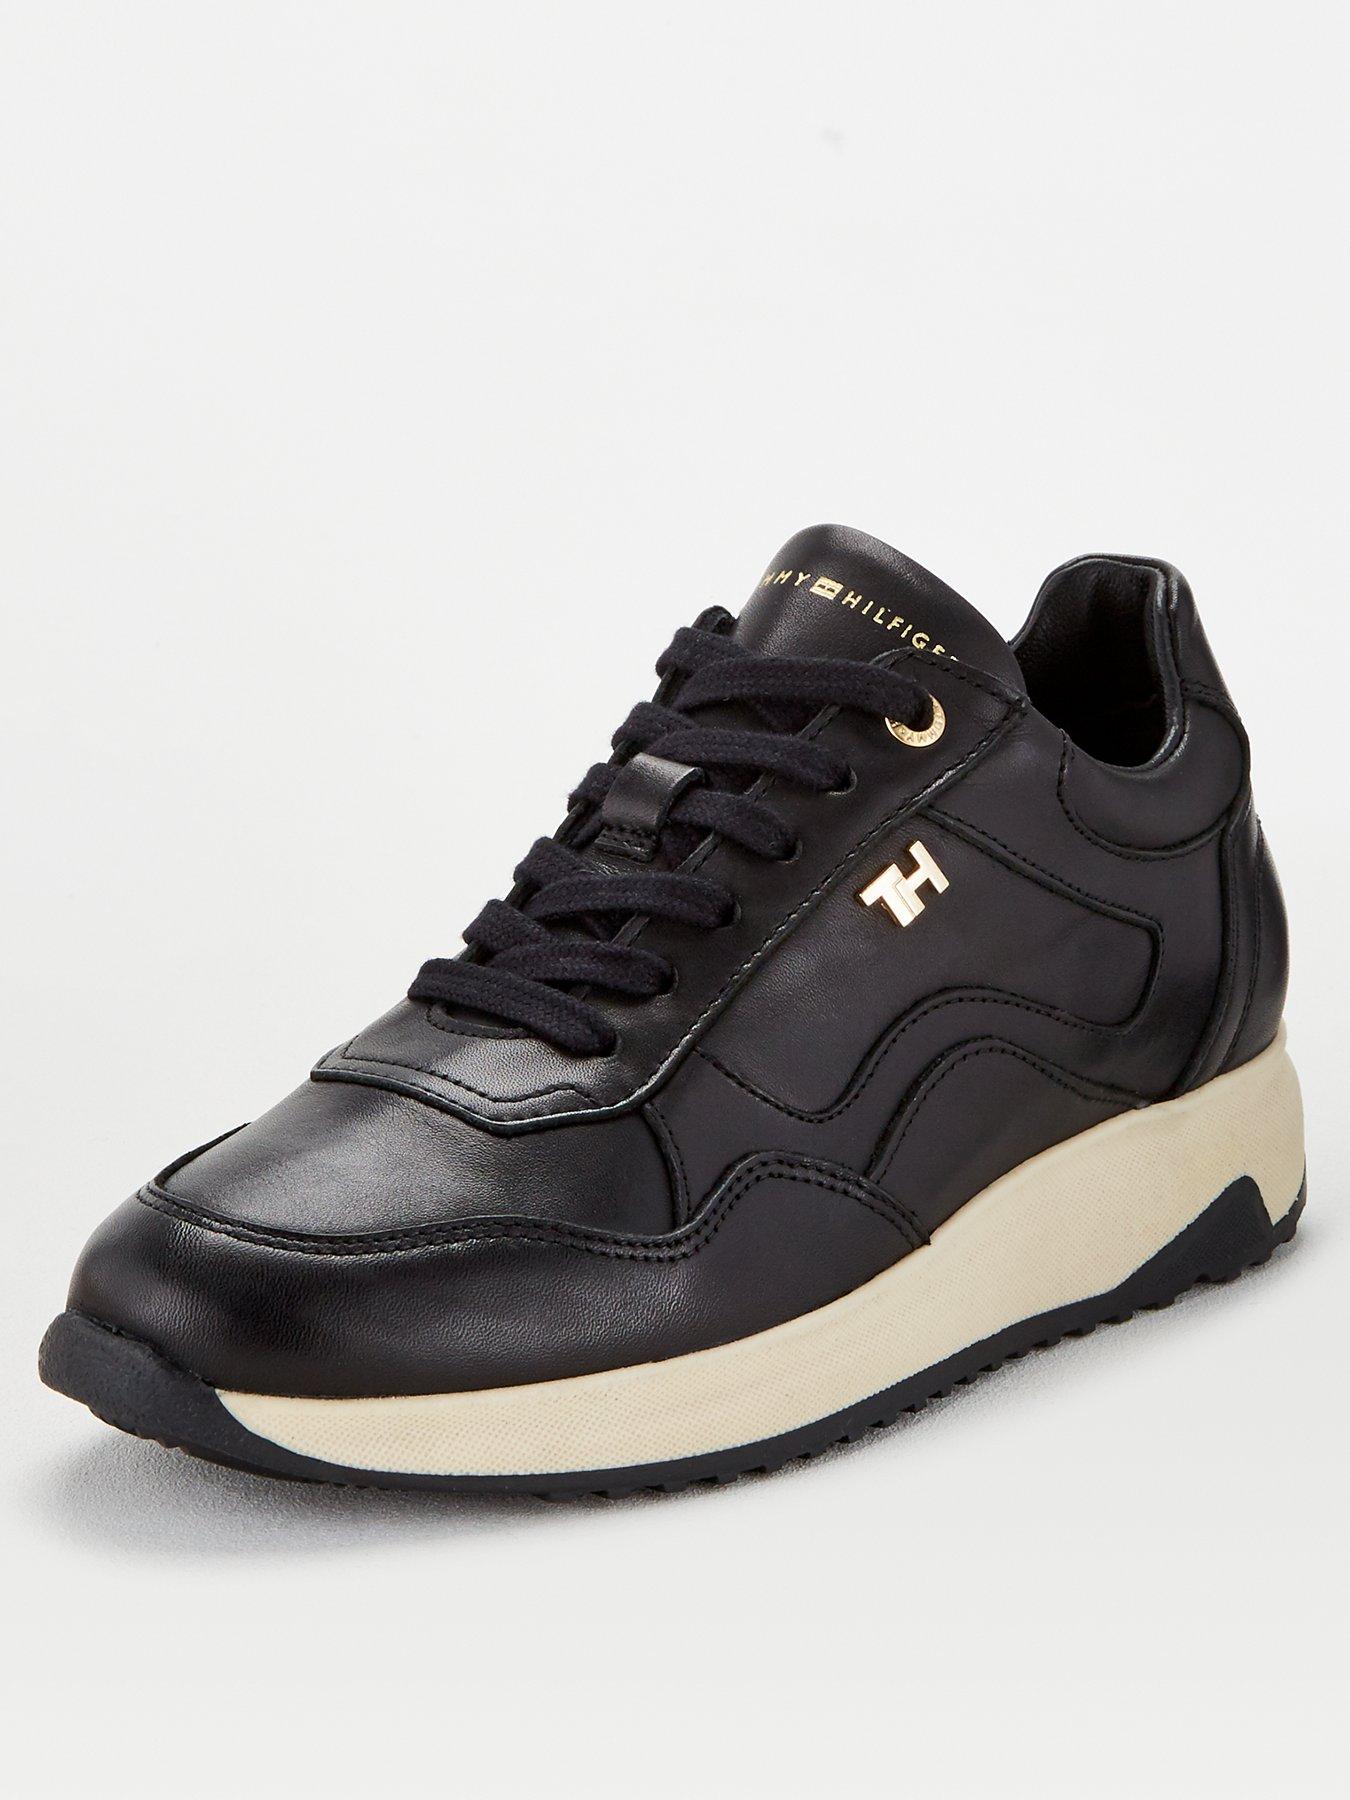 tommy hilfiger shoes winter 219